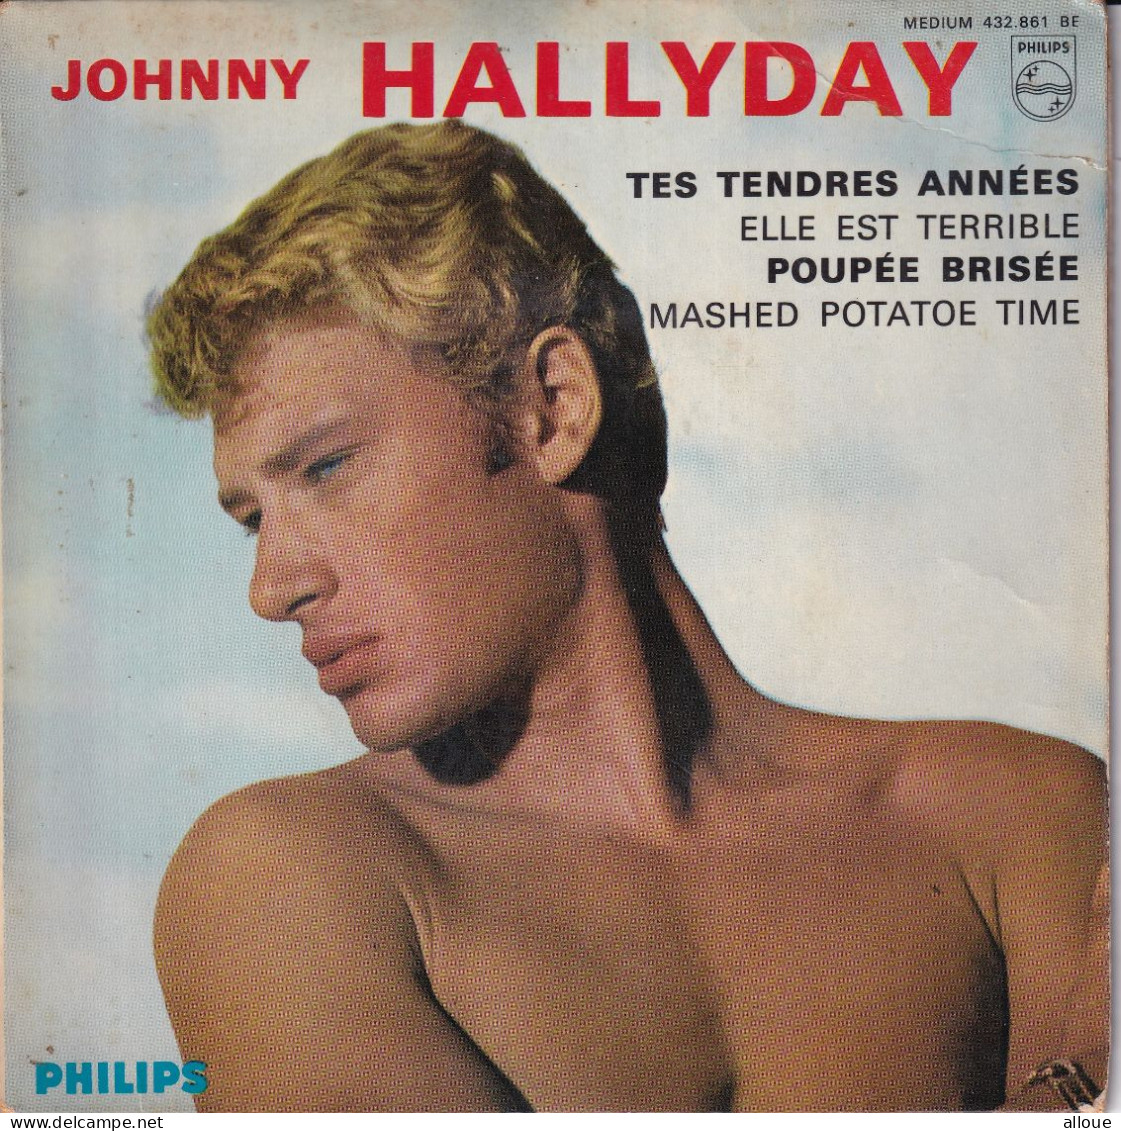 JOHNNY HALLYDAY - FR EP - TES TENDRES ANNEES + 3 - Other - French Music